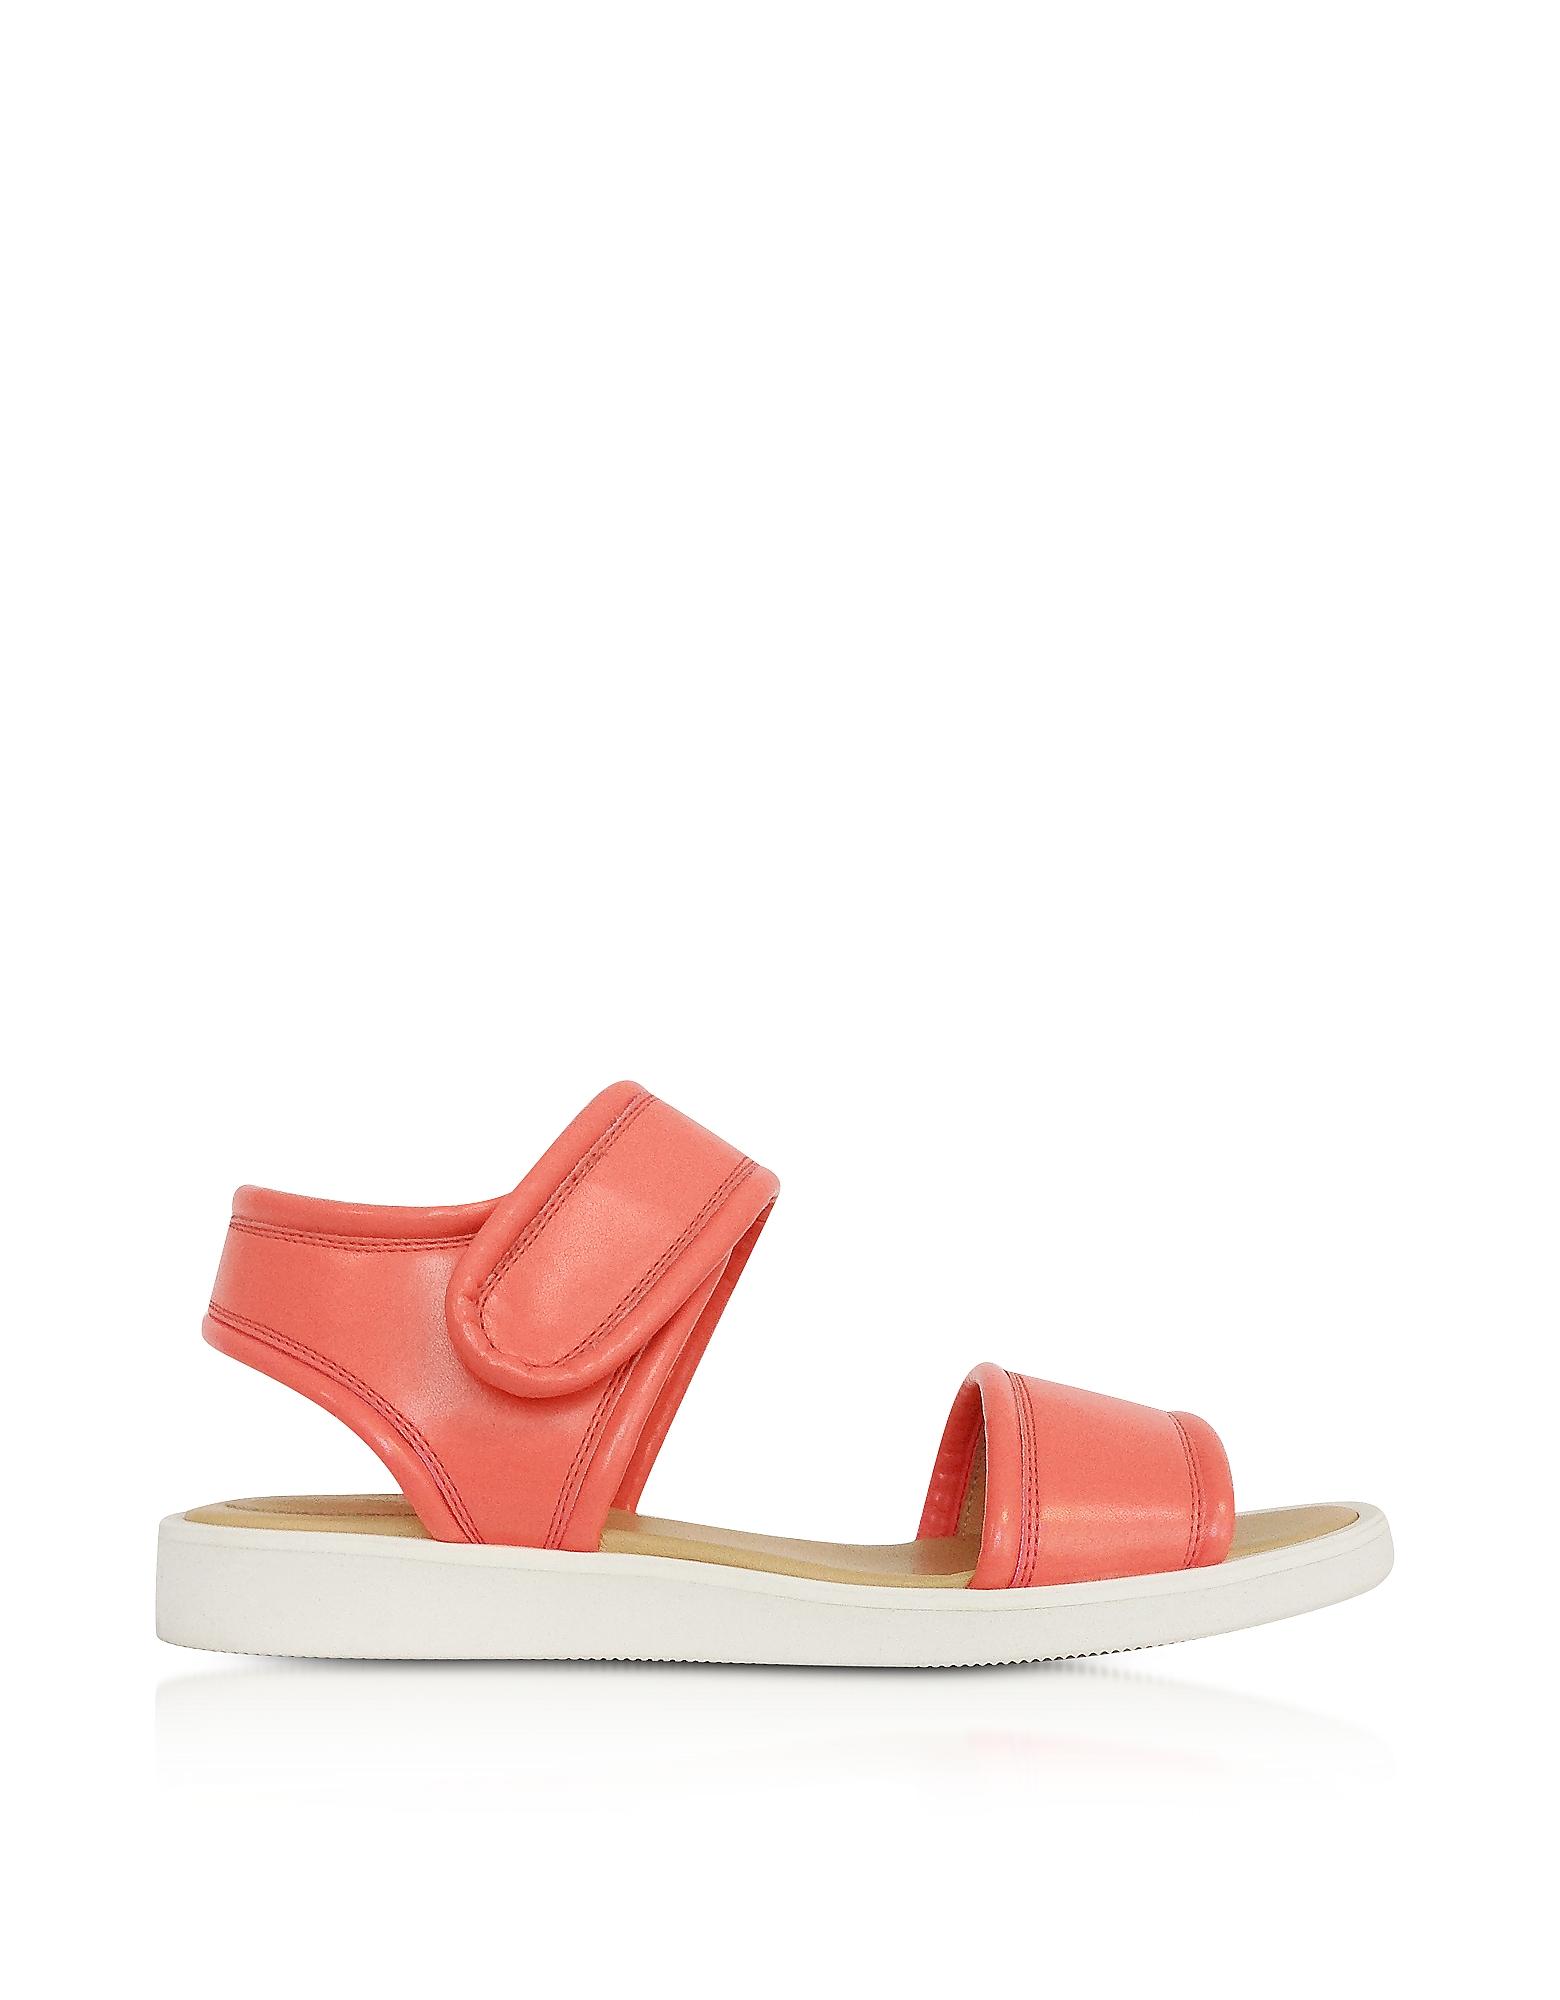 Mm6 by maison martin margiela Salmon Pink Eco Leather Flat Sandal in ...